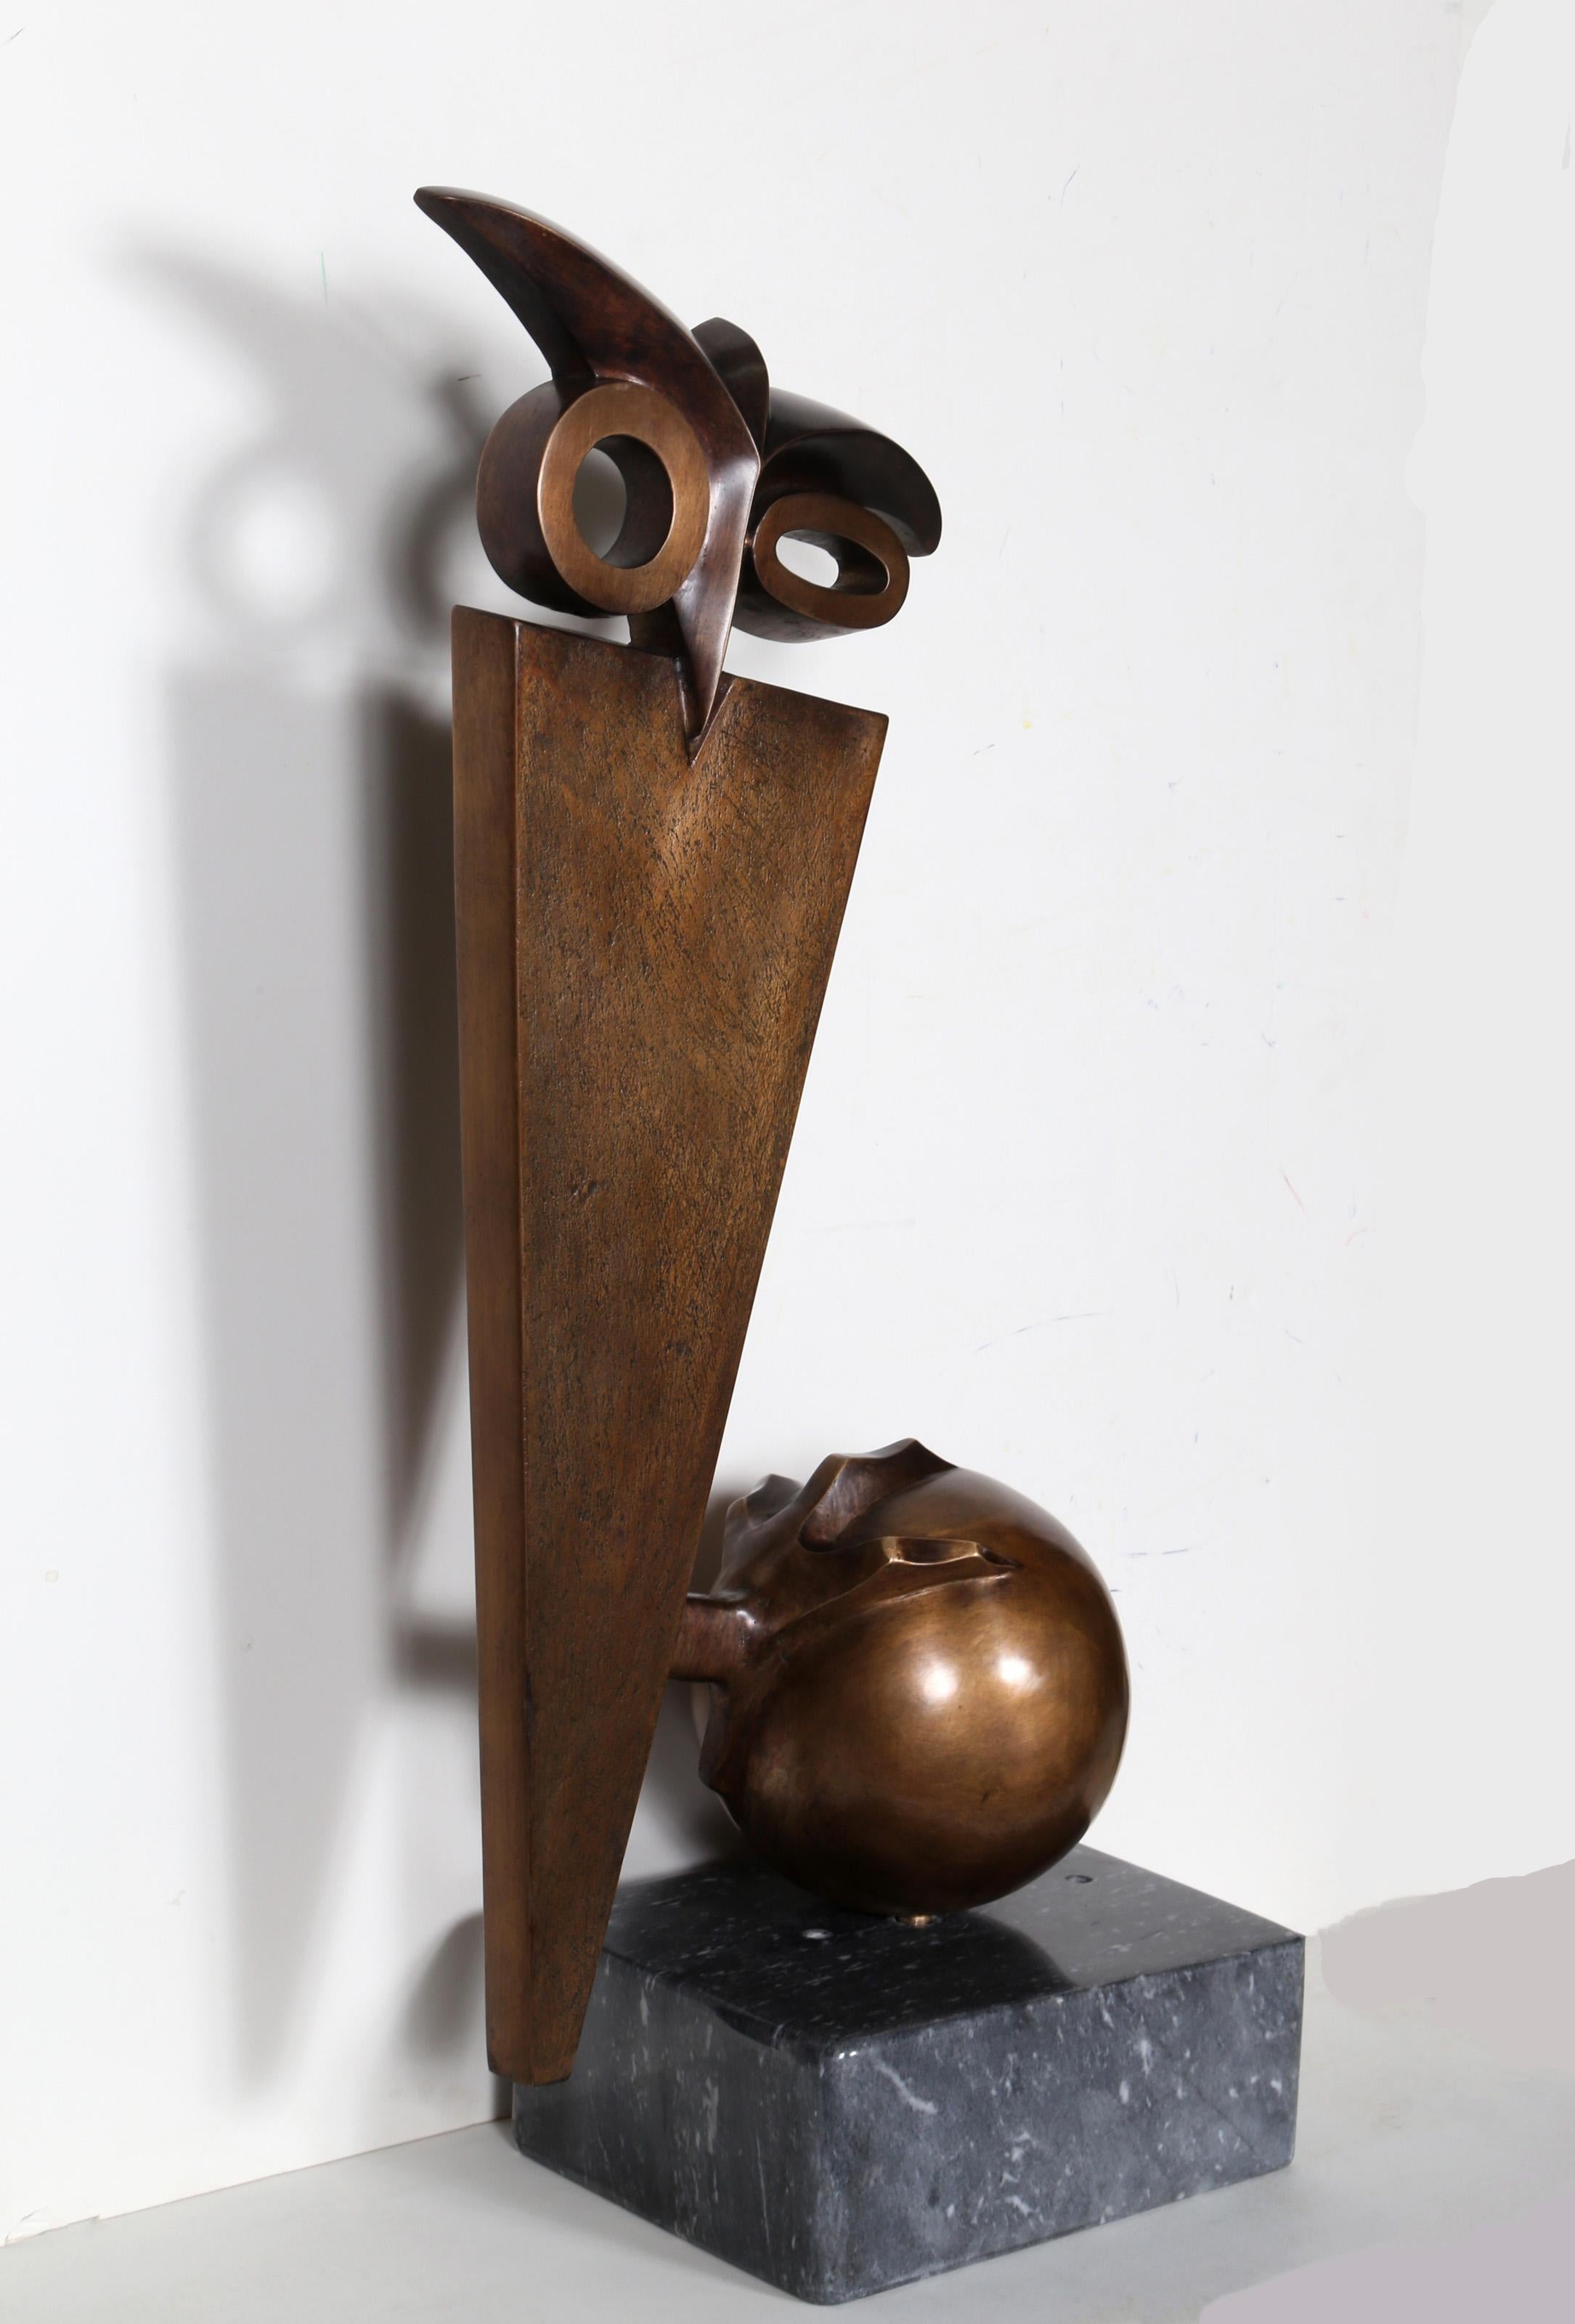 Owl Perched on Ball, Bronze Sculpture by Constantin Antonovici For Sale 3